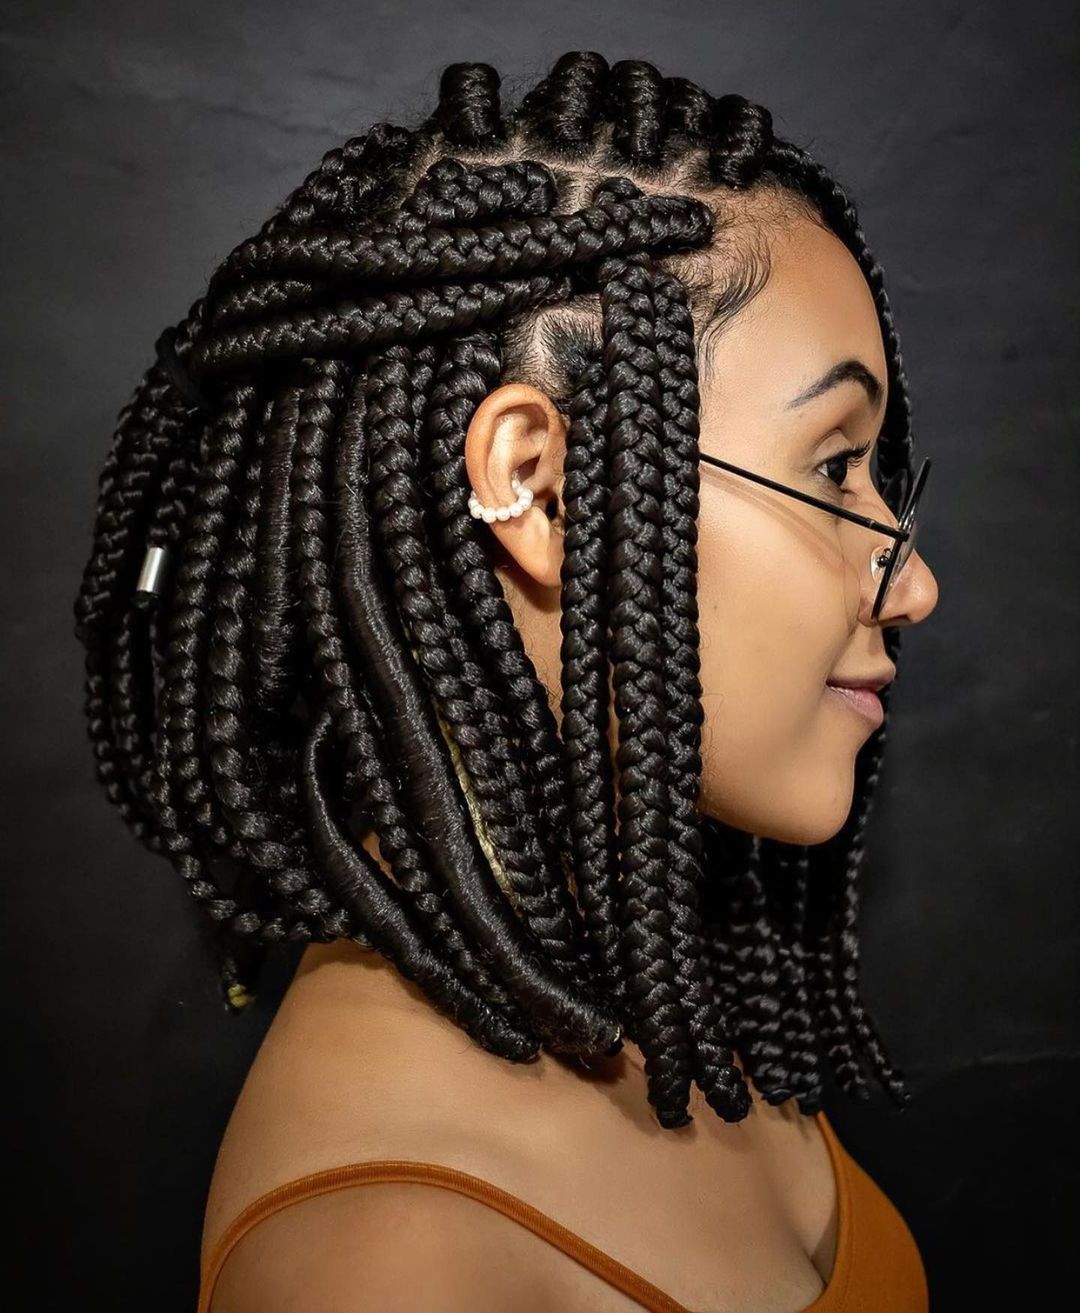 50 Box Braid Hairstyles Worth Trying This Year | Thrivenaija For Newest Big Braids Hairstyles For Medium Length Hair (View 19 of 25)